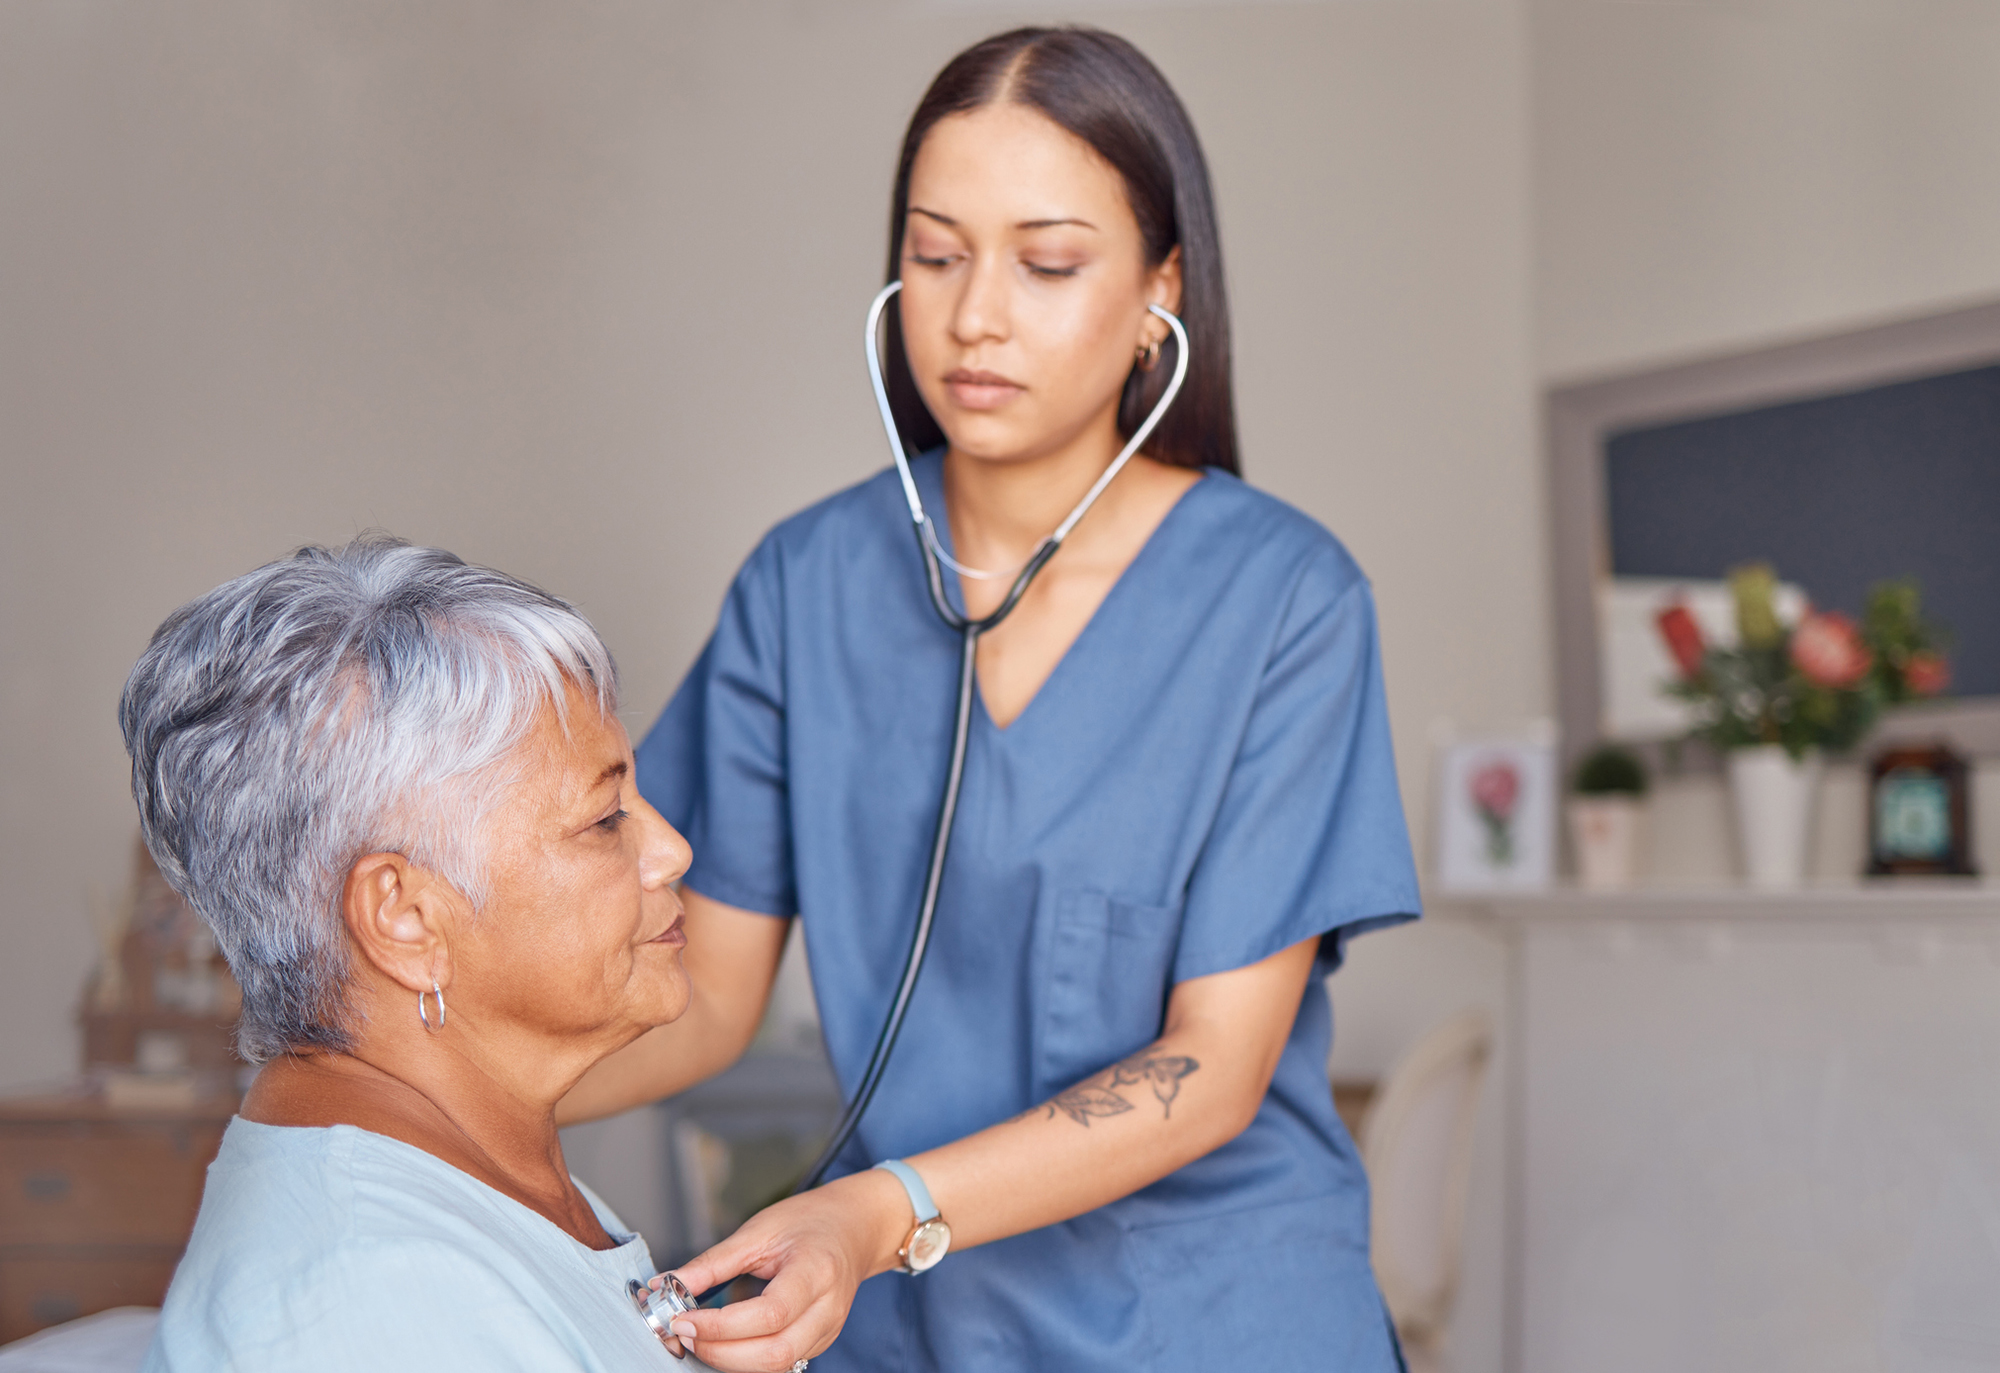 A home health worker checks the heartbeat of a senior patient.